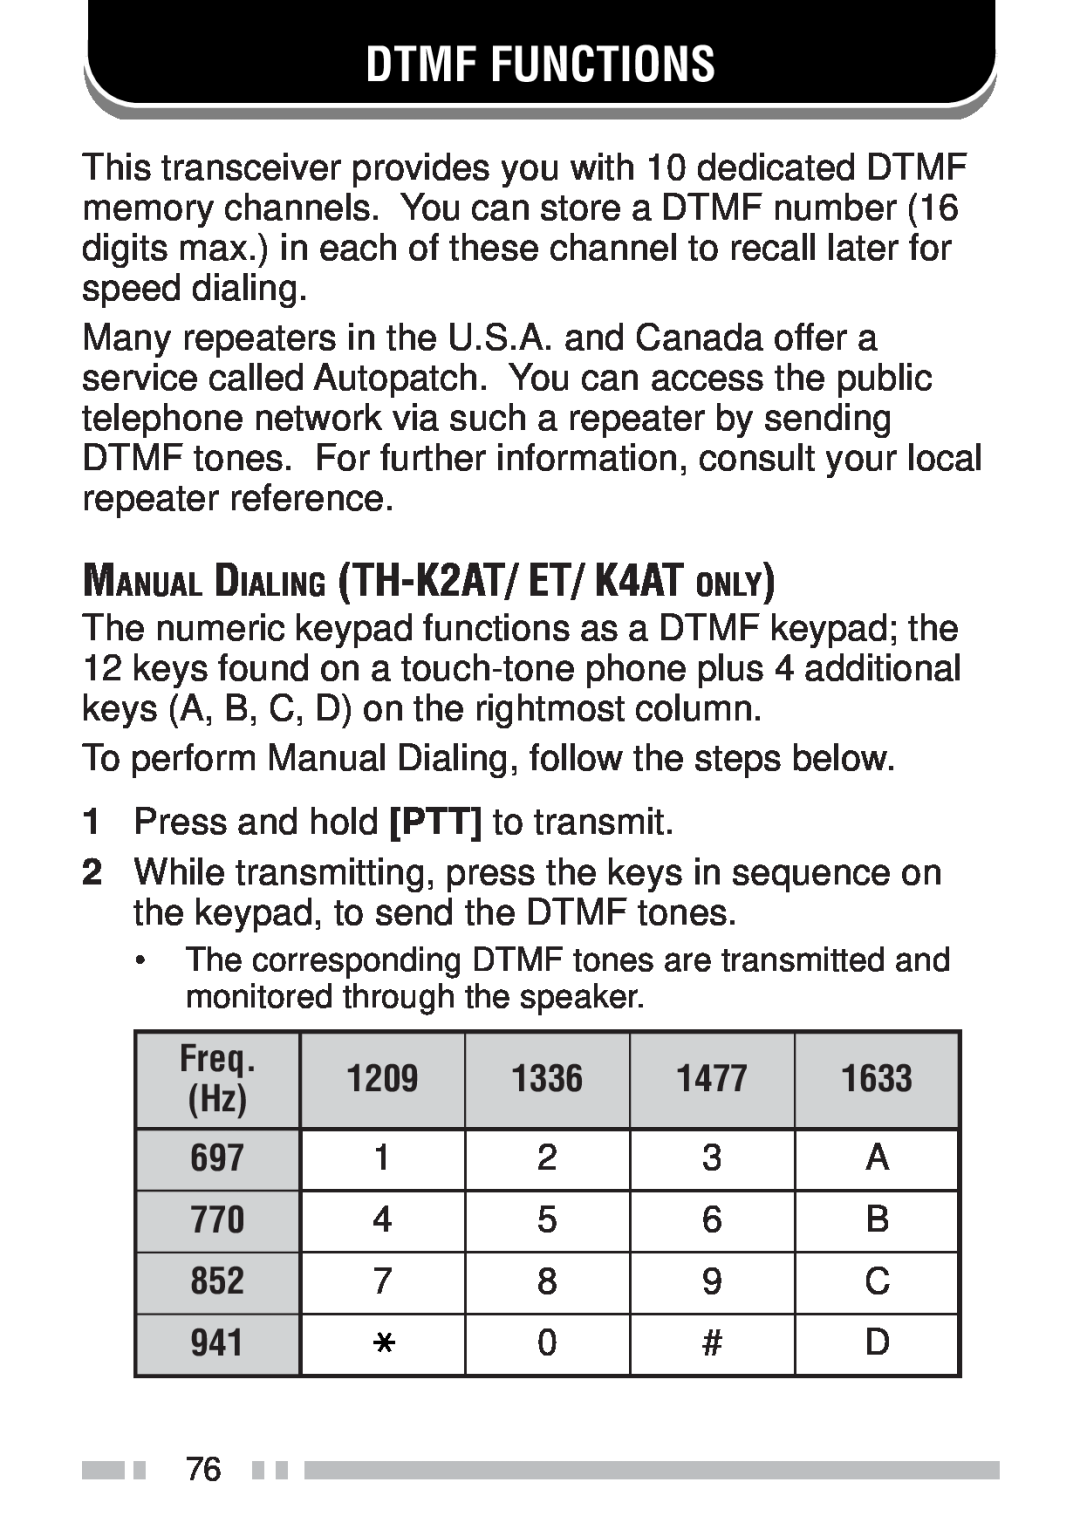 Kenwood TH-KAE, TH-K4AT, TH-K2ET Dtmf Functions, MANUAL DIALING TH-K2AT/ET/ K4AT ONLY, Freq, 1209, 1336, 1477, 1633 